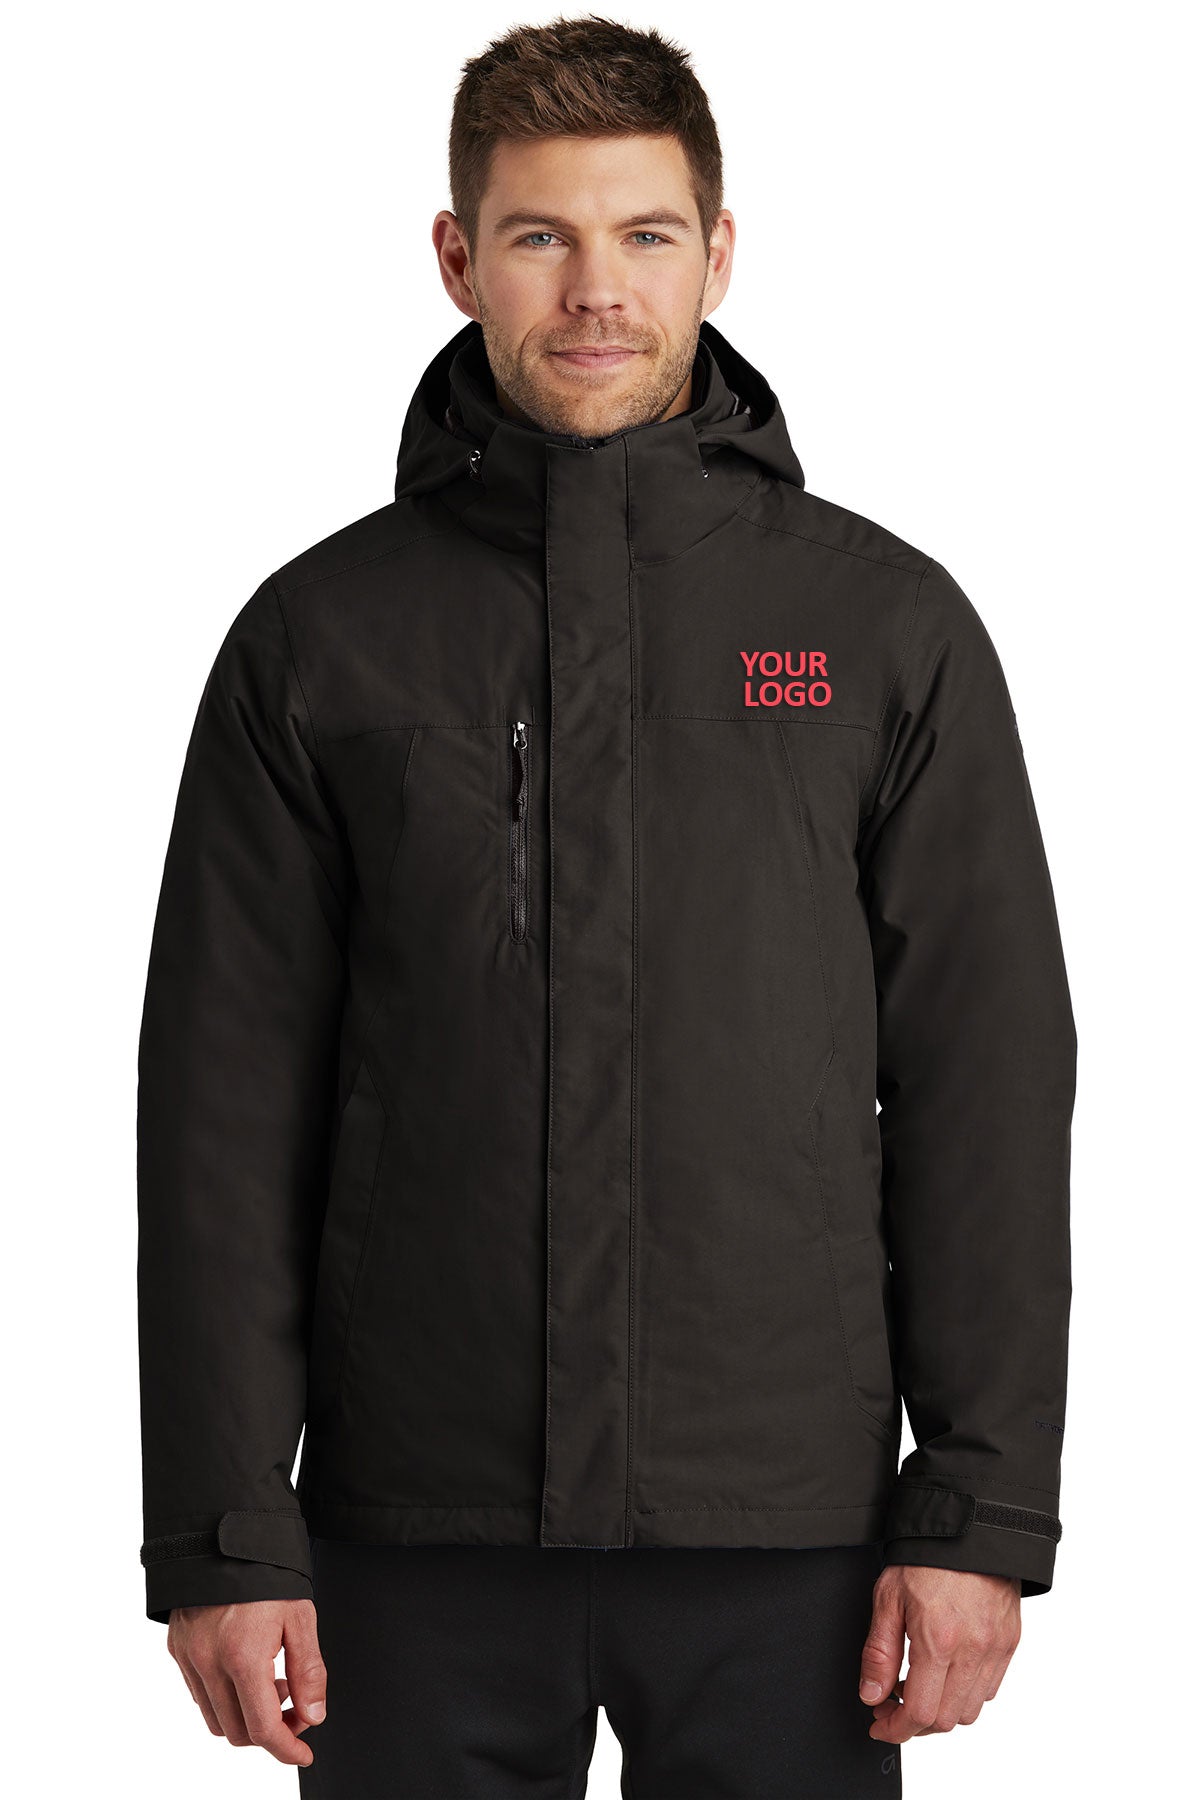 The North Face TNF Black/ TNF Black NF0A3VHR company jackets with logo